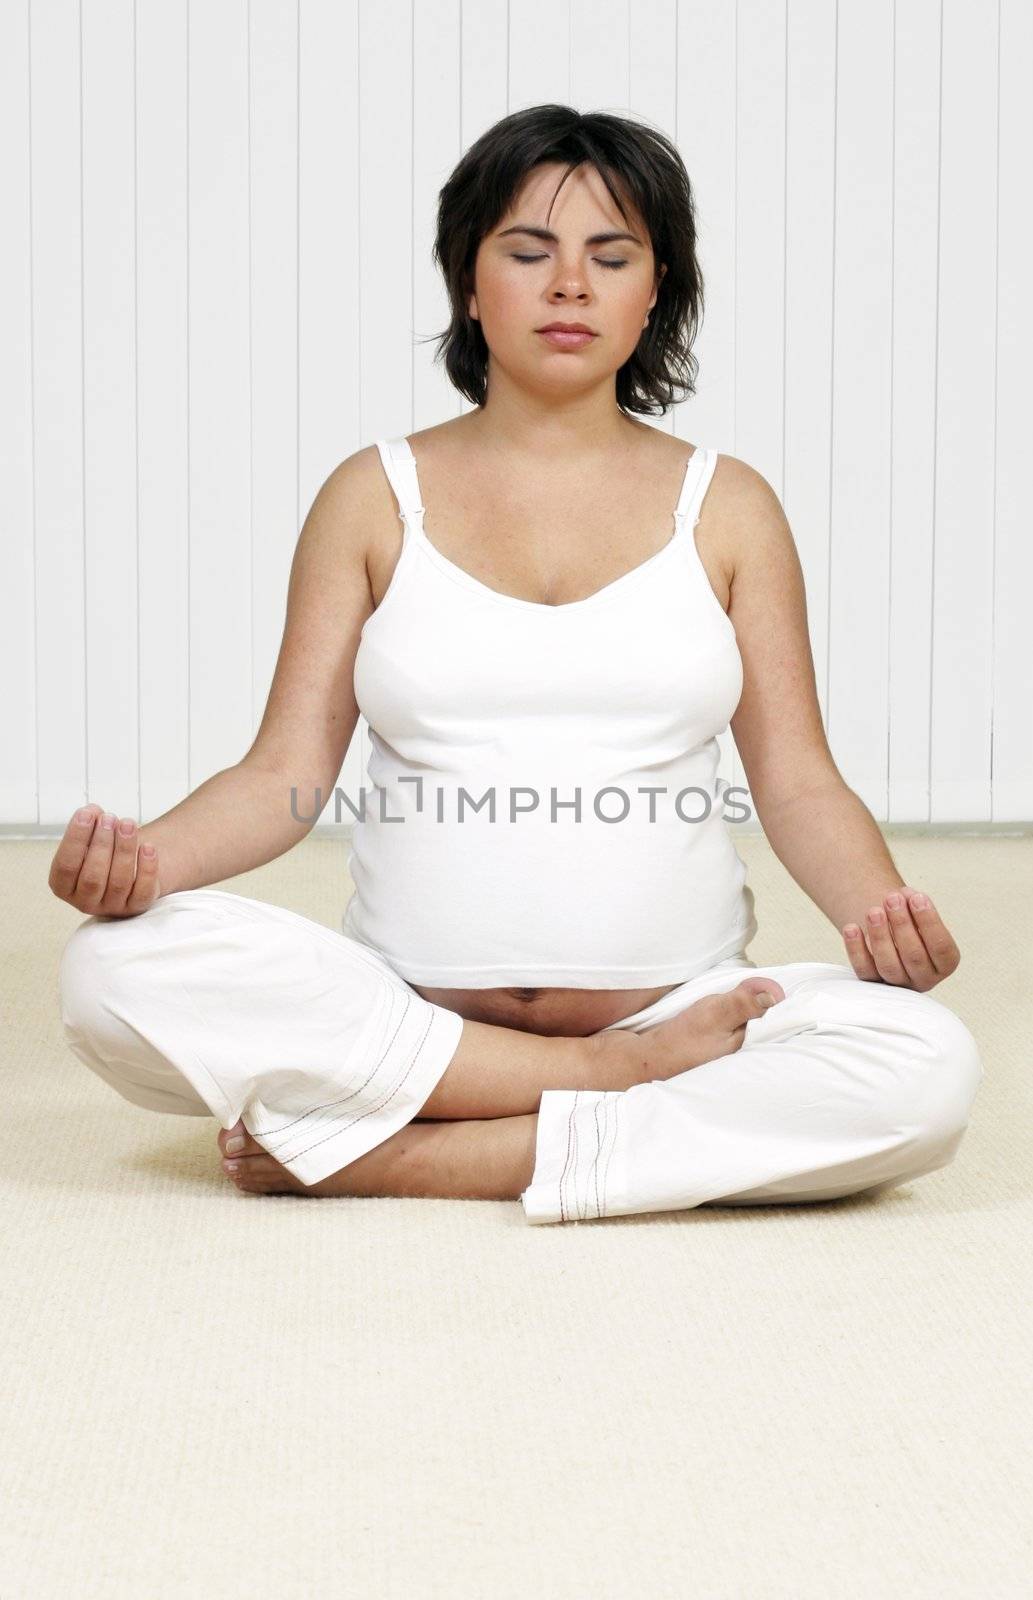 A pregnant woman in a state of calm